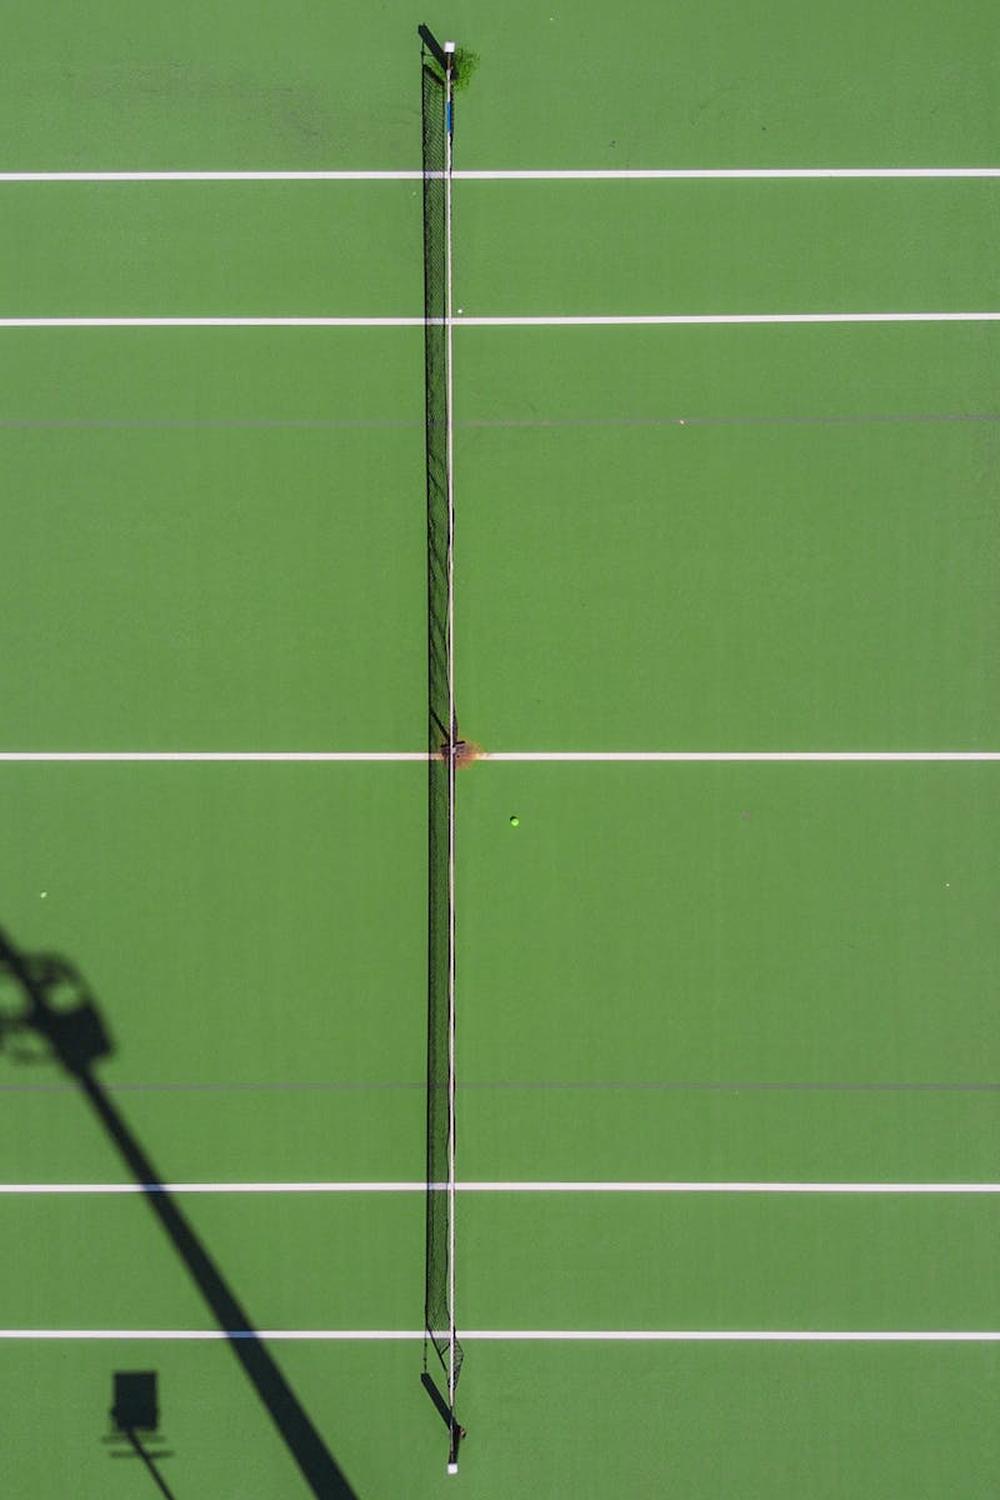 two_person_playing_tennis